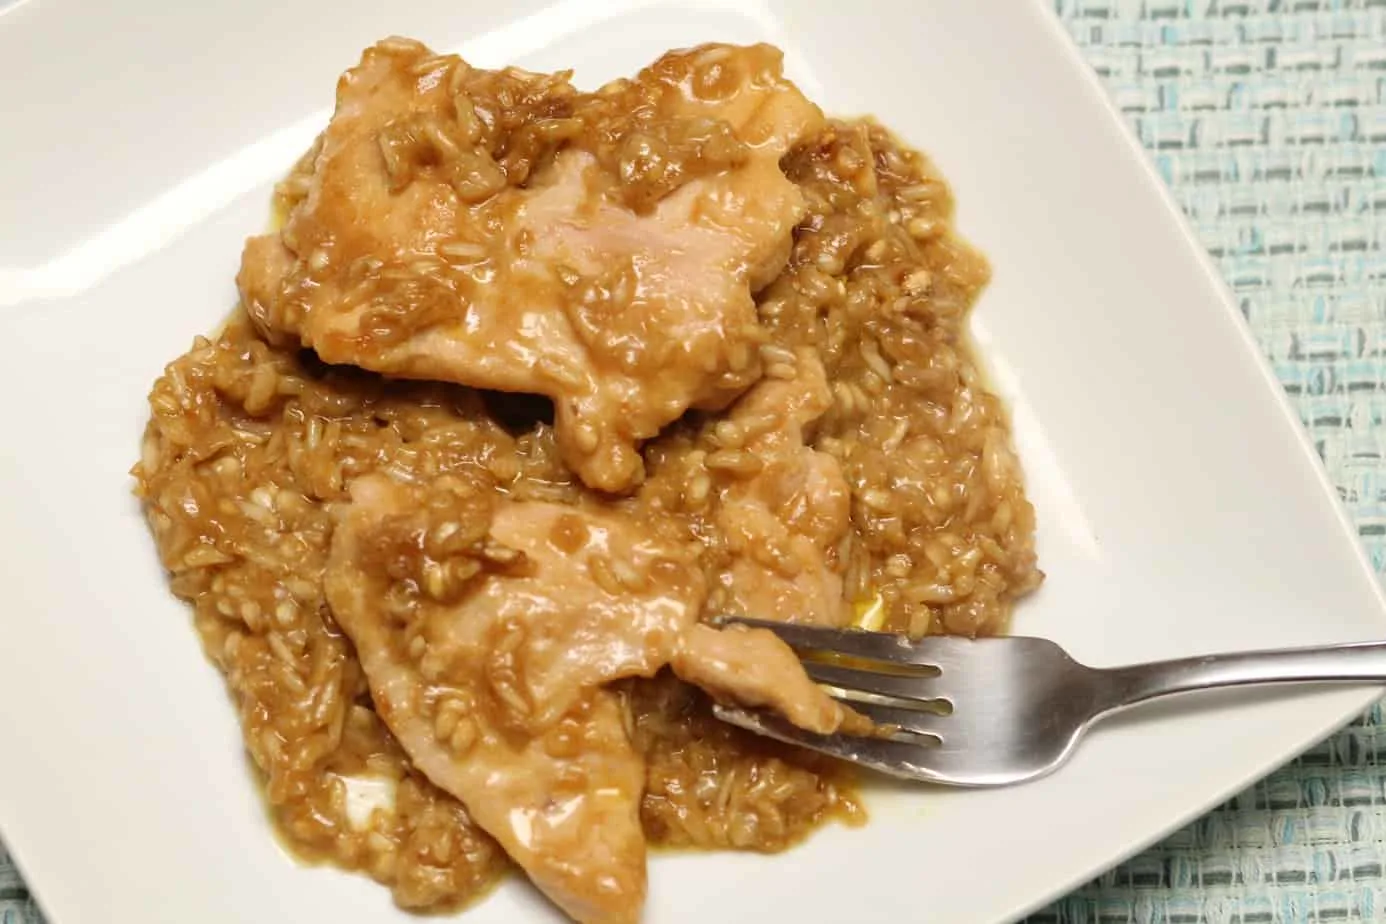 What's For Dinner: Creamy Chicken & Rice {Recipe}